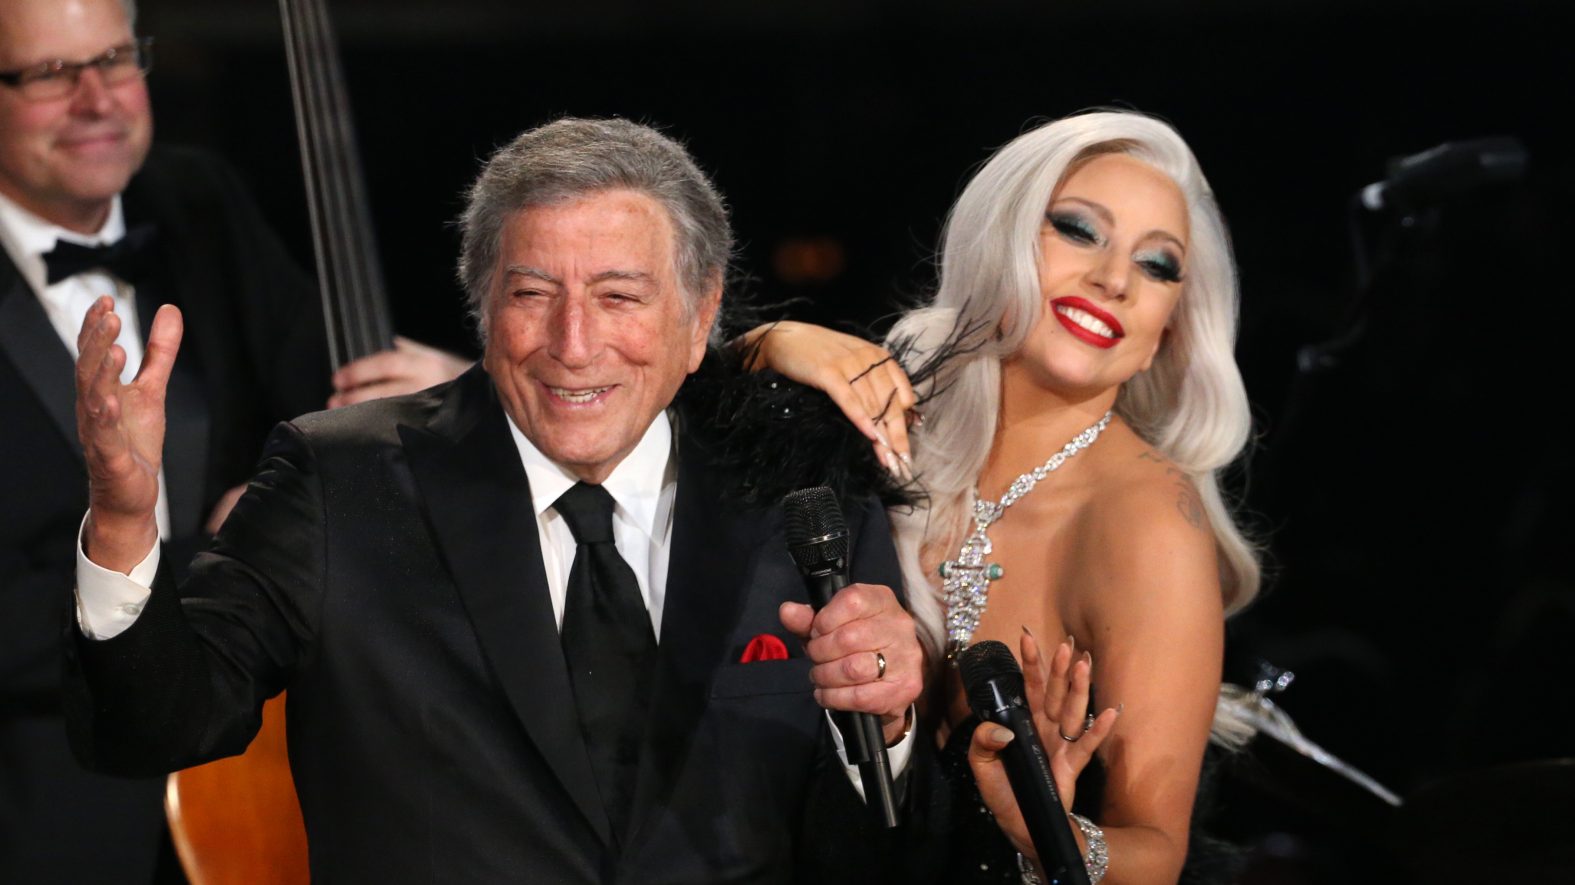 A “Magical” New York Night With Lady Gaga and Tony Bennett